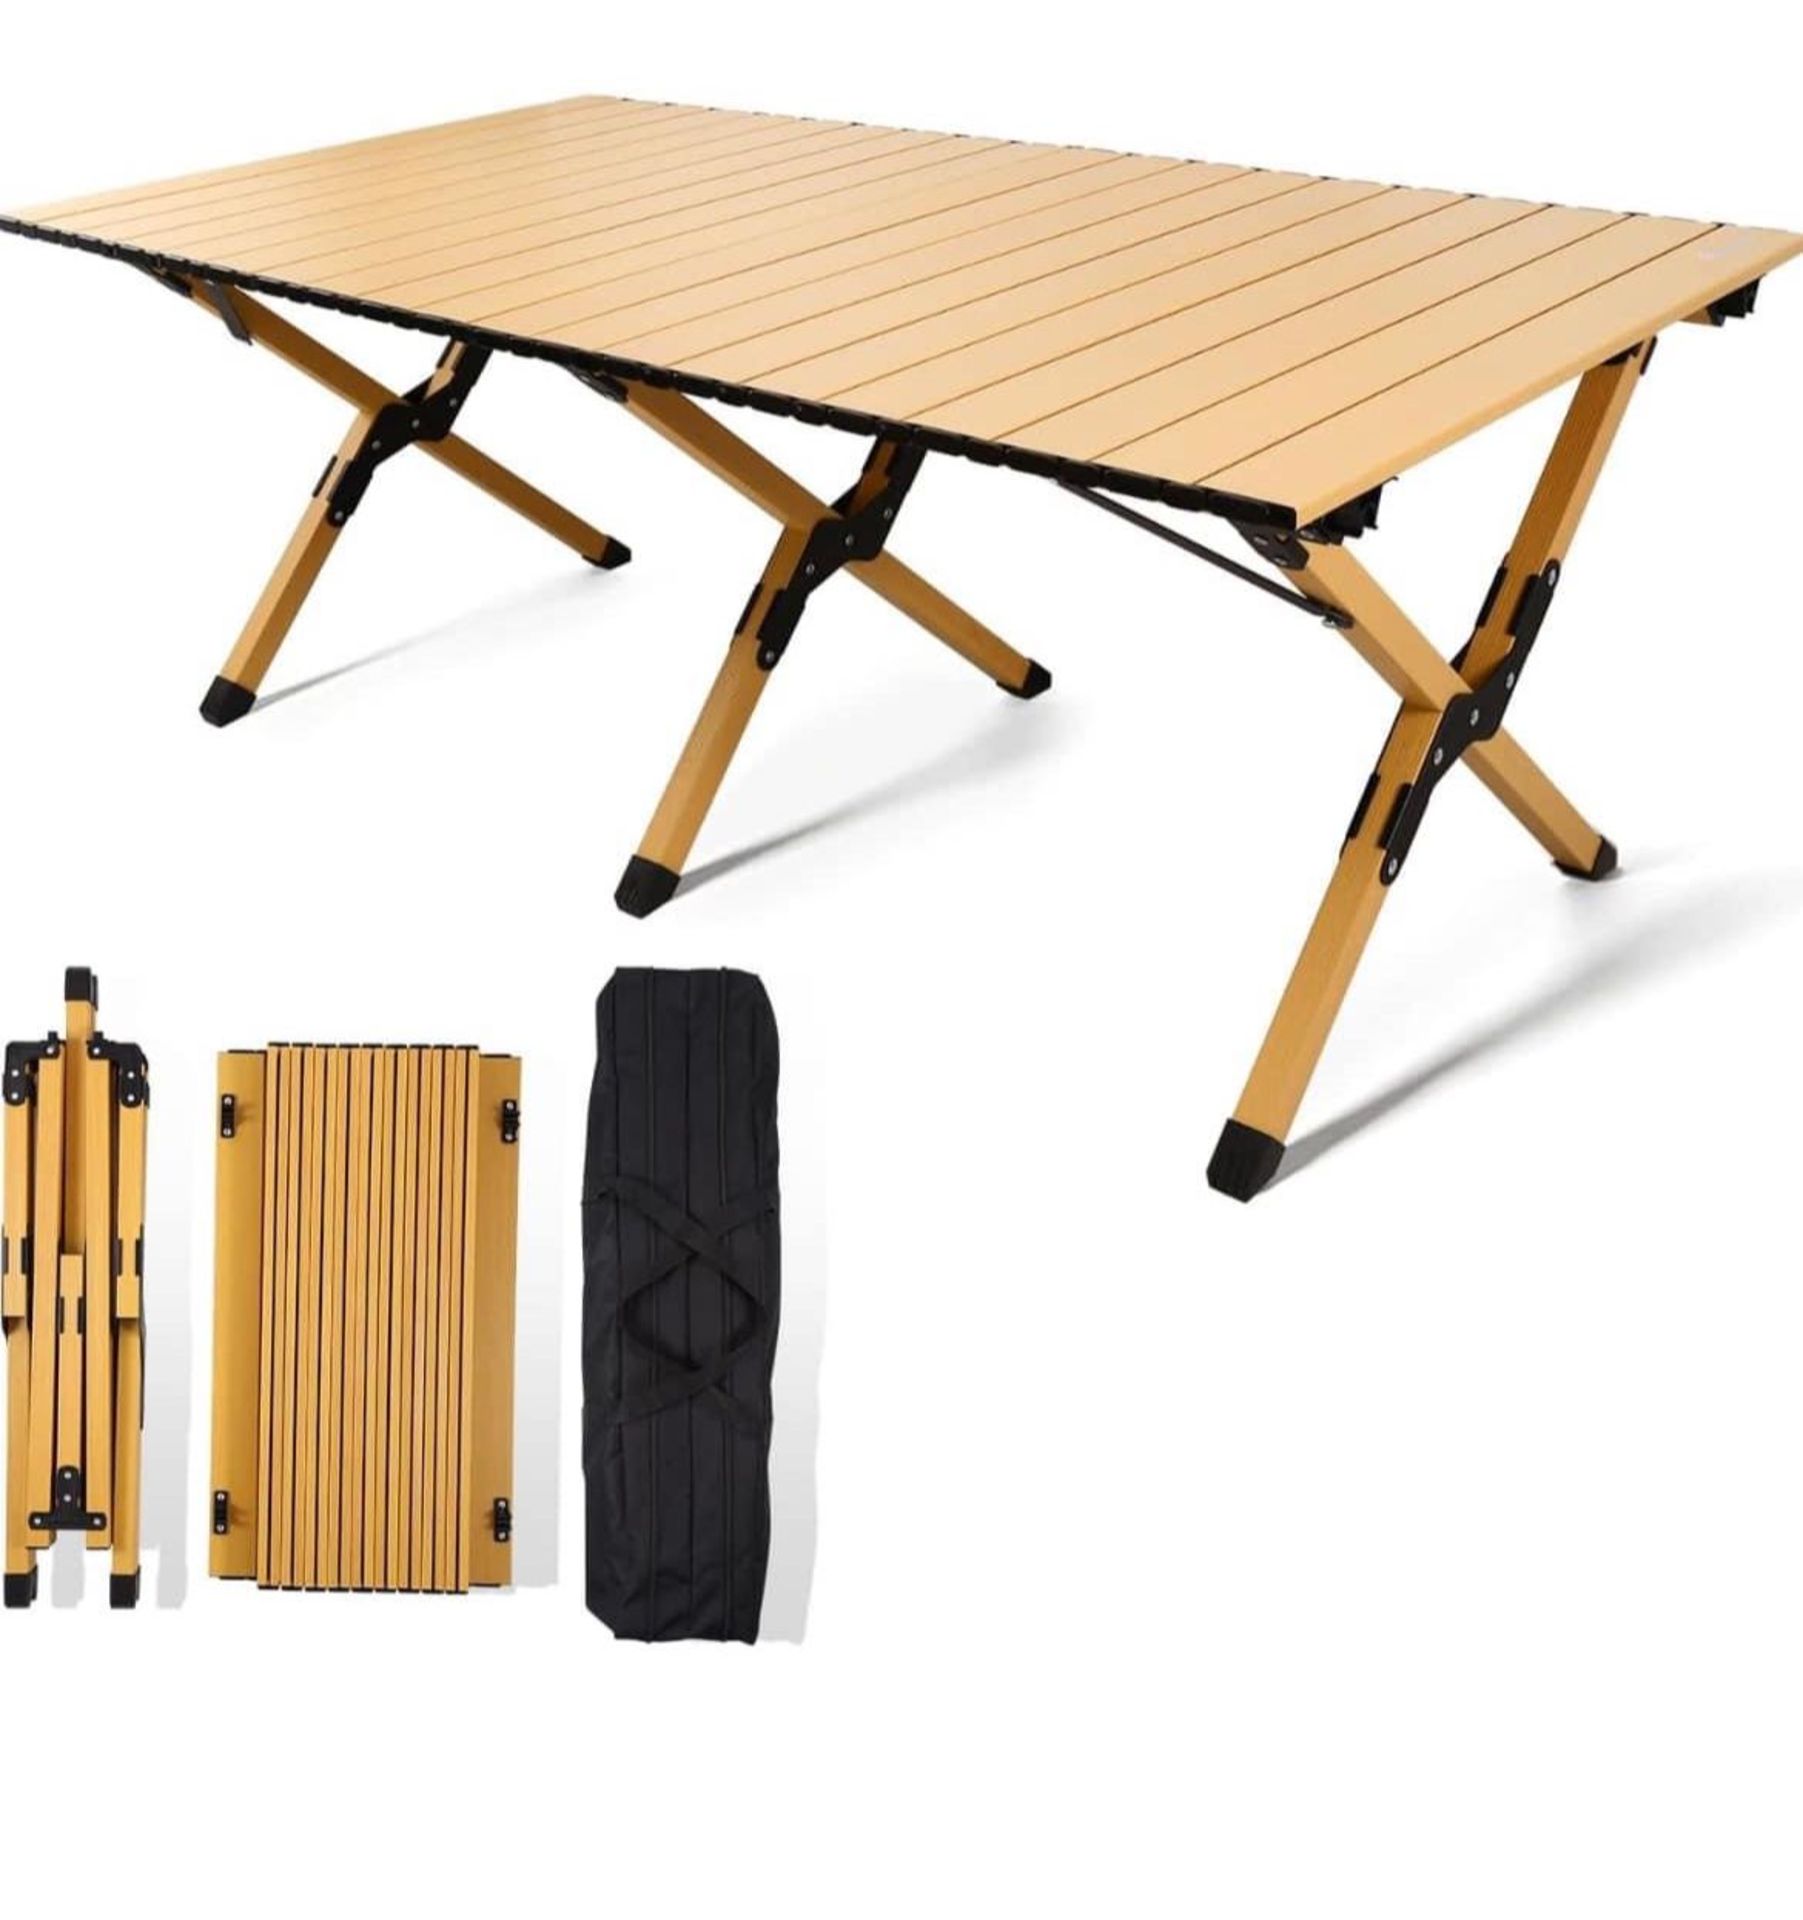 1 X BRAND NEW CAMPING TABLE